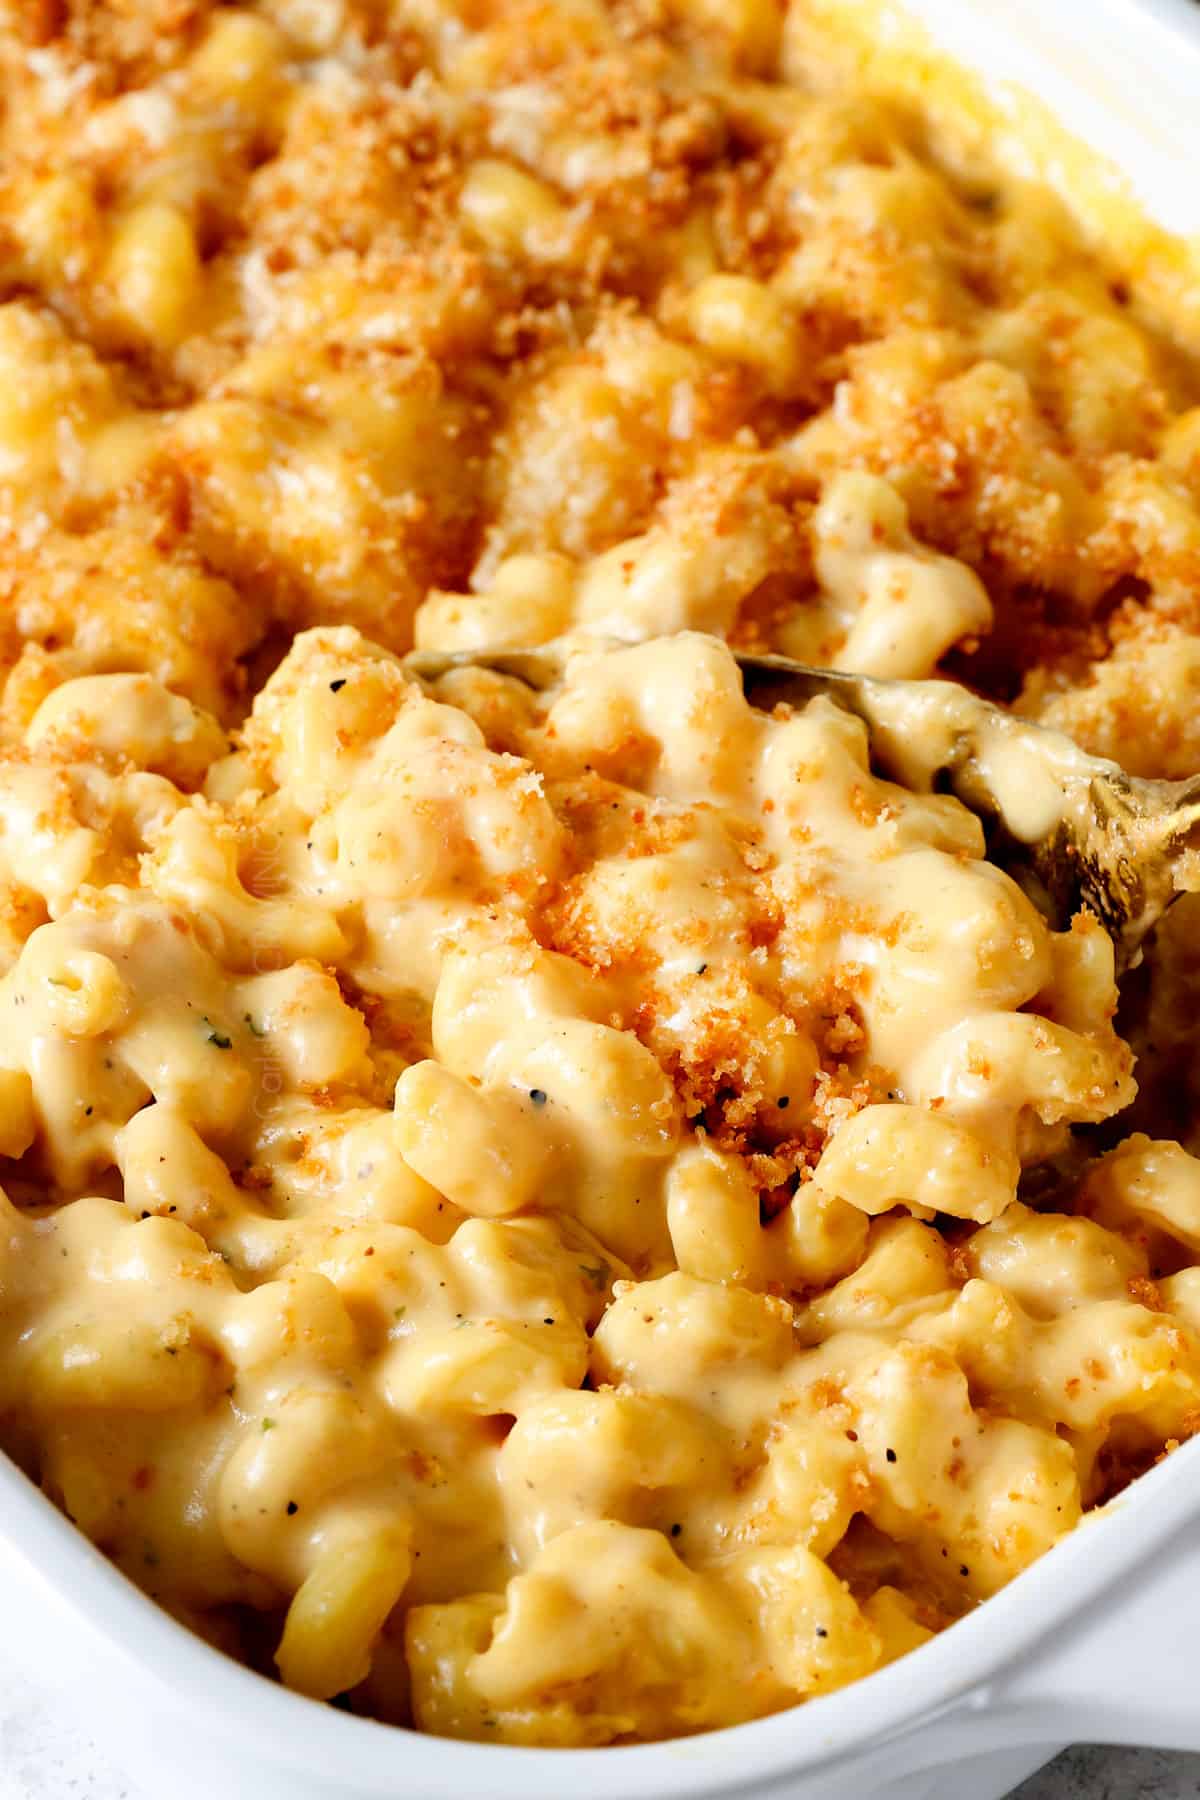 up close of best macaroni and cheese recipe showing how rich and creamy it is